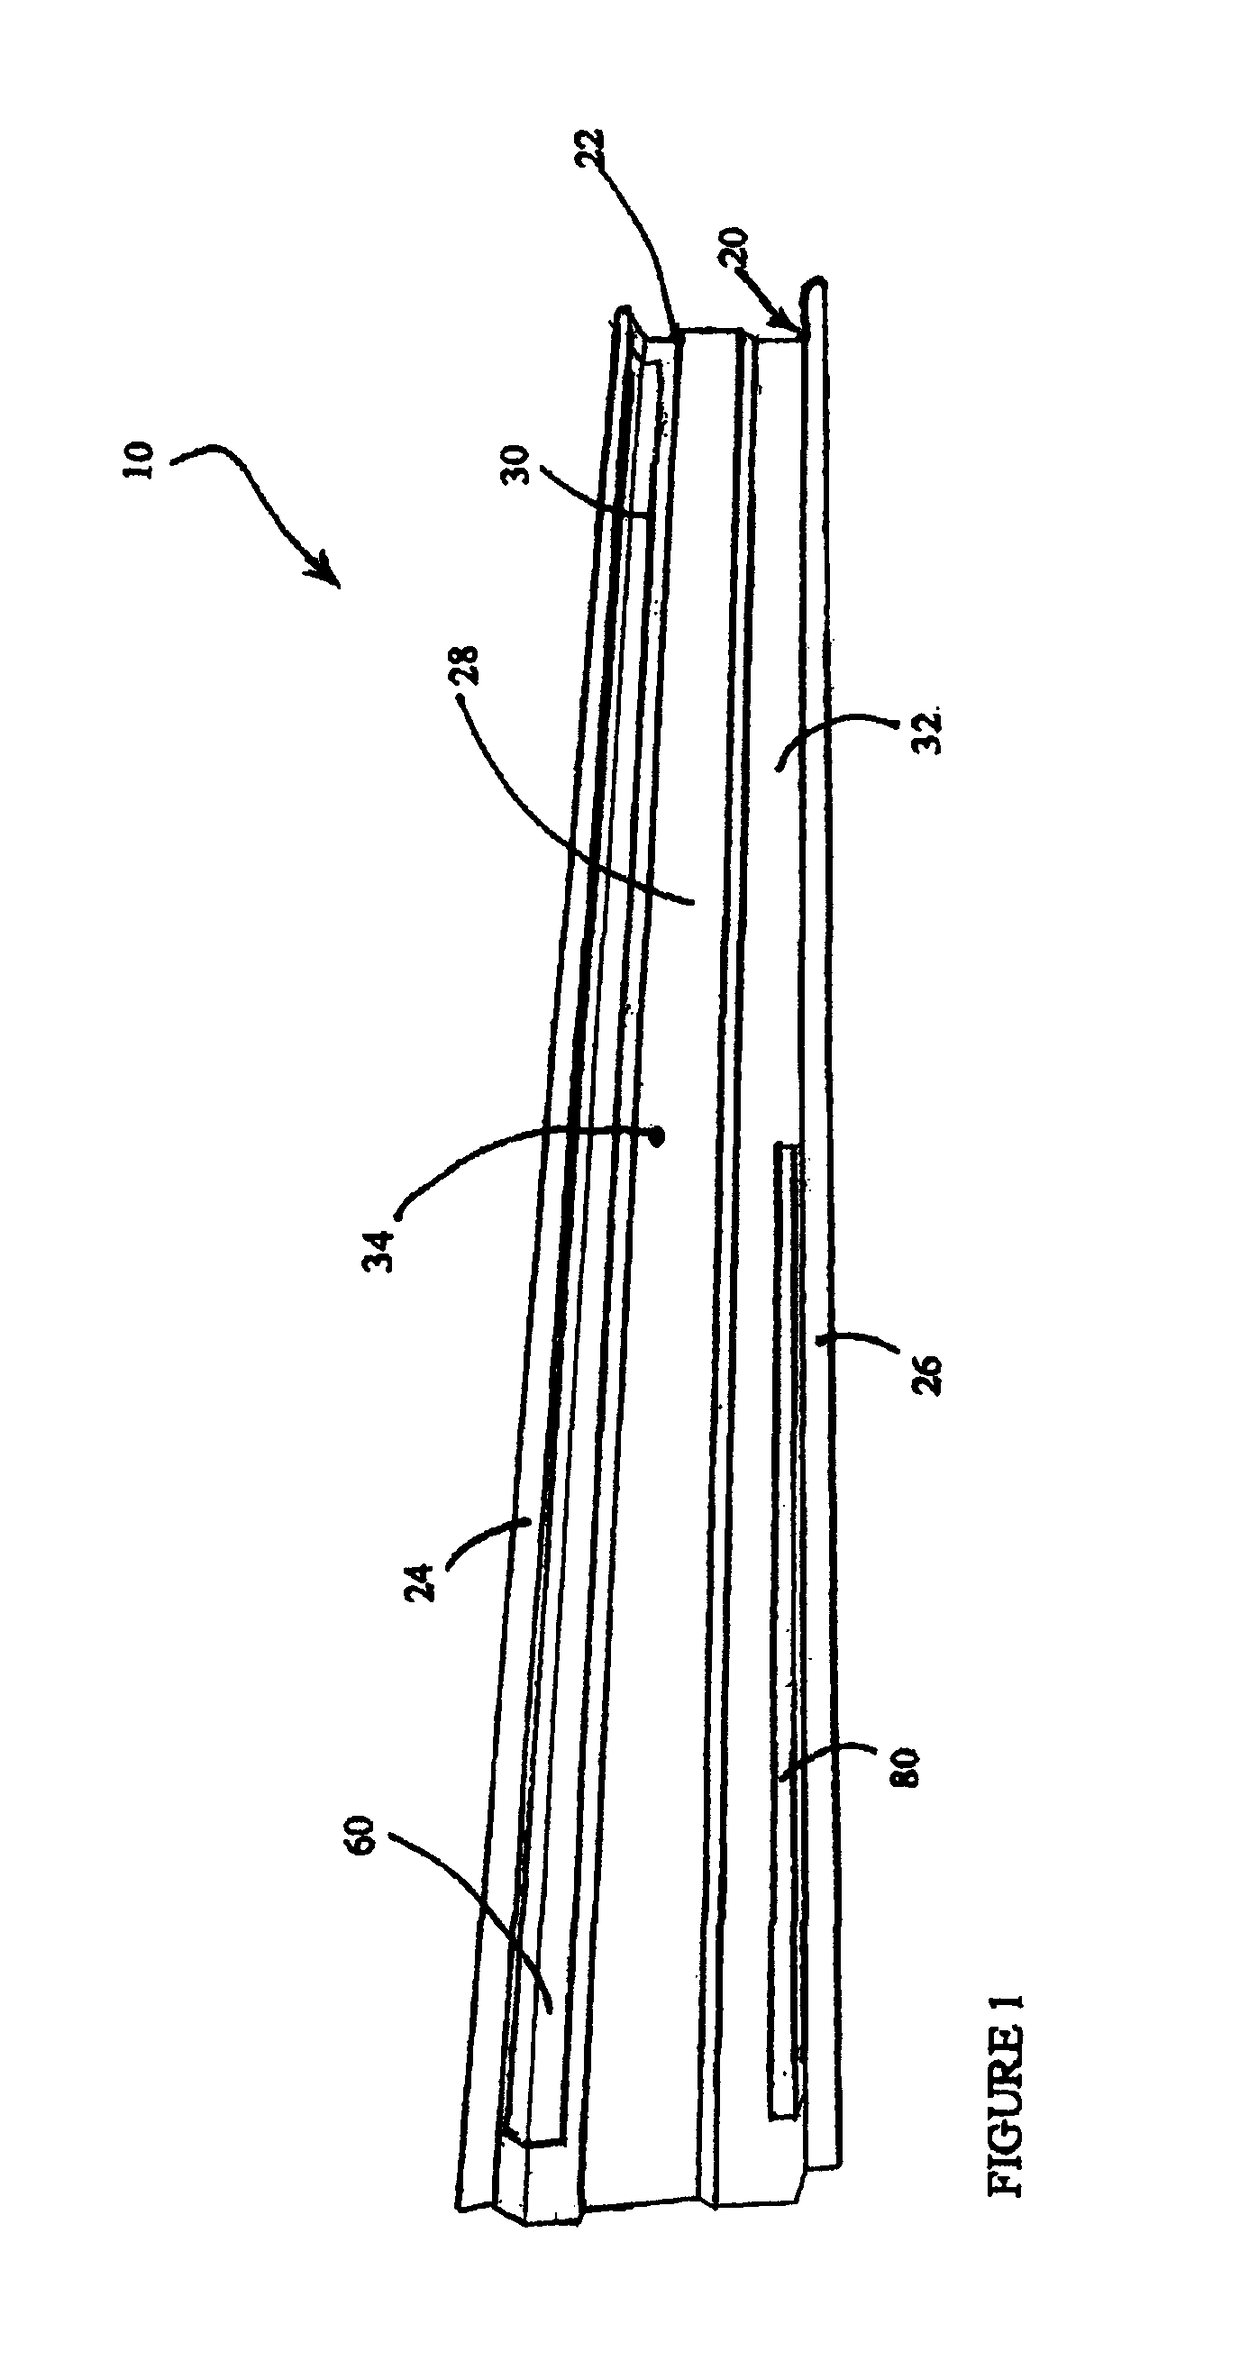 Process for forming reinforced rocker panel assembly